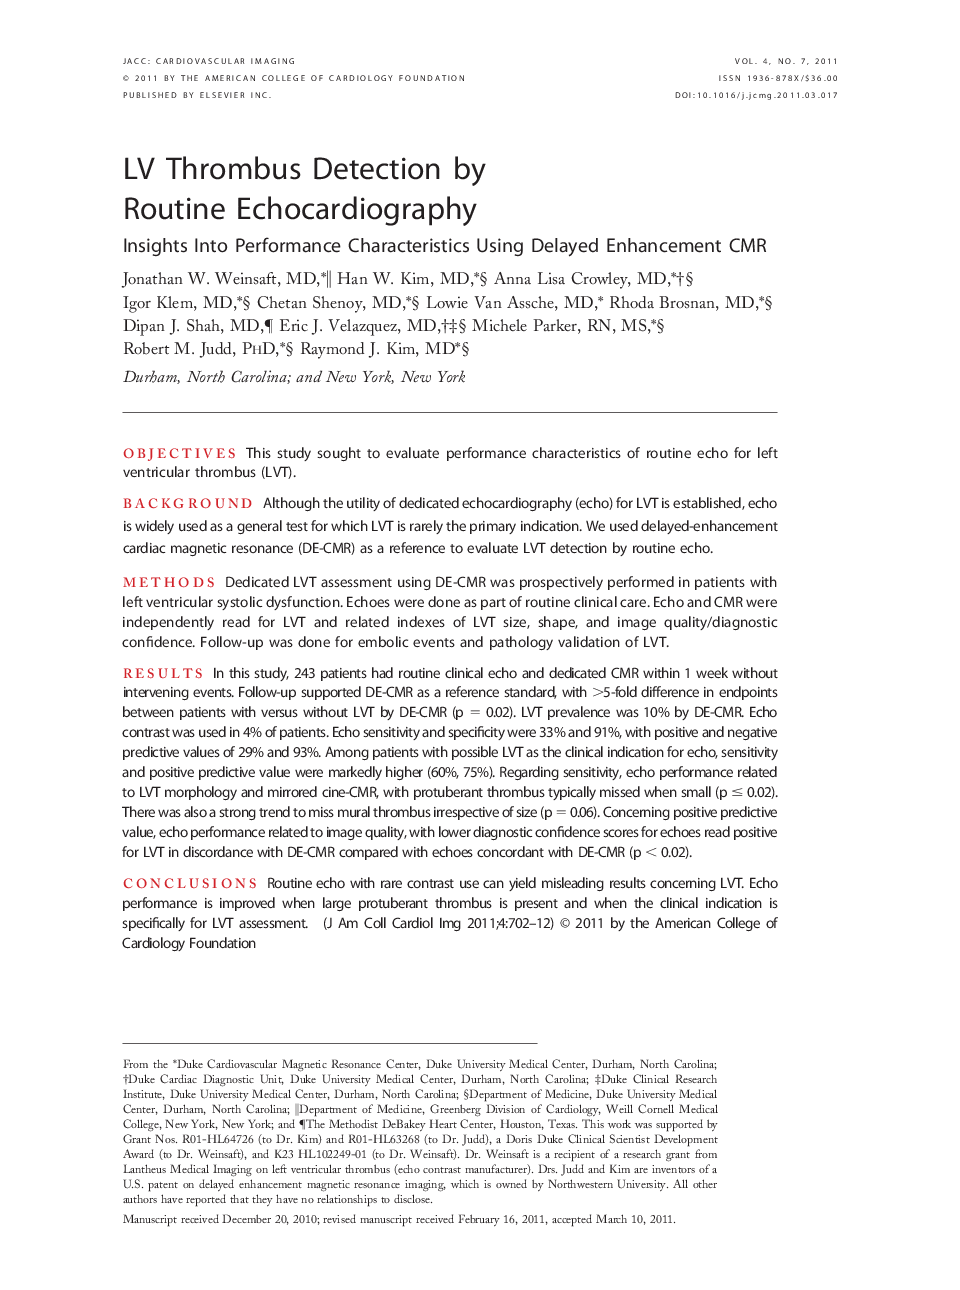 LV Thrombus Detection by Routine Echocardiography : Insights Into Performance Characteristics Using Delayed Enhancement CMR